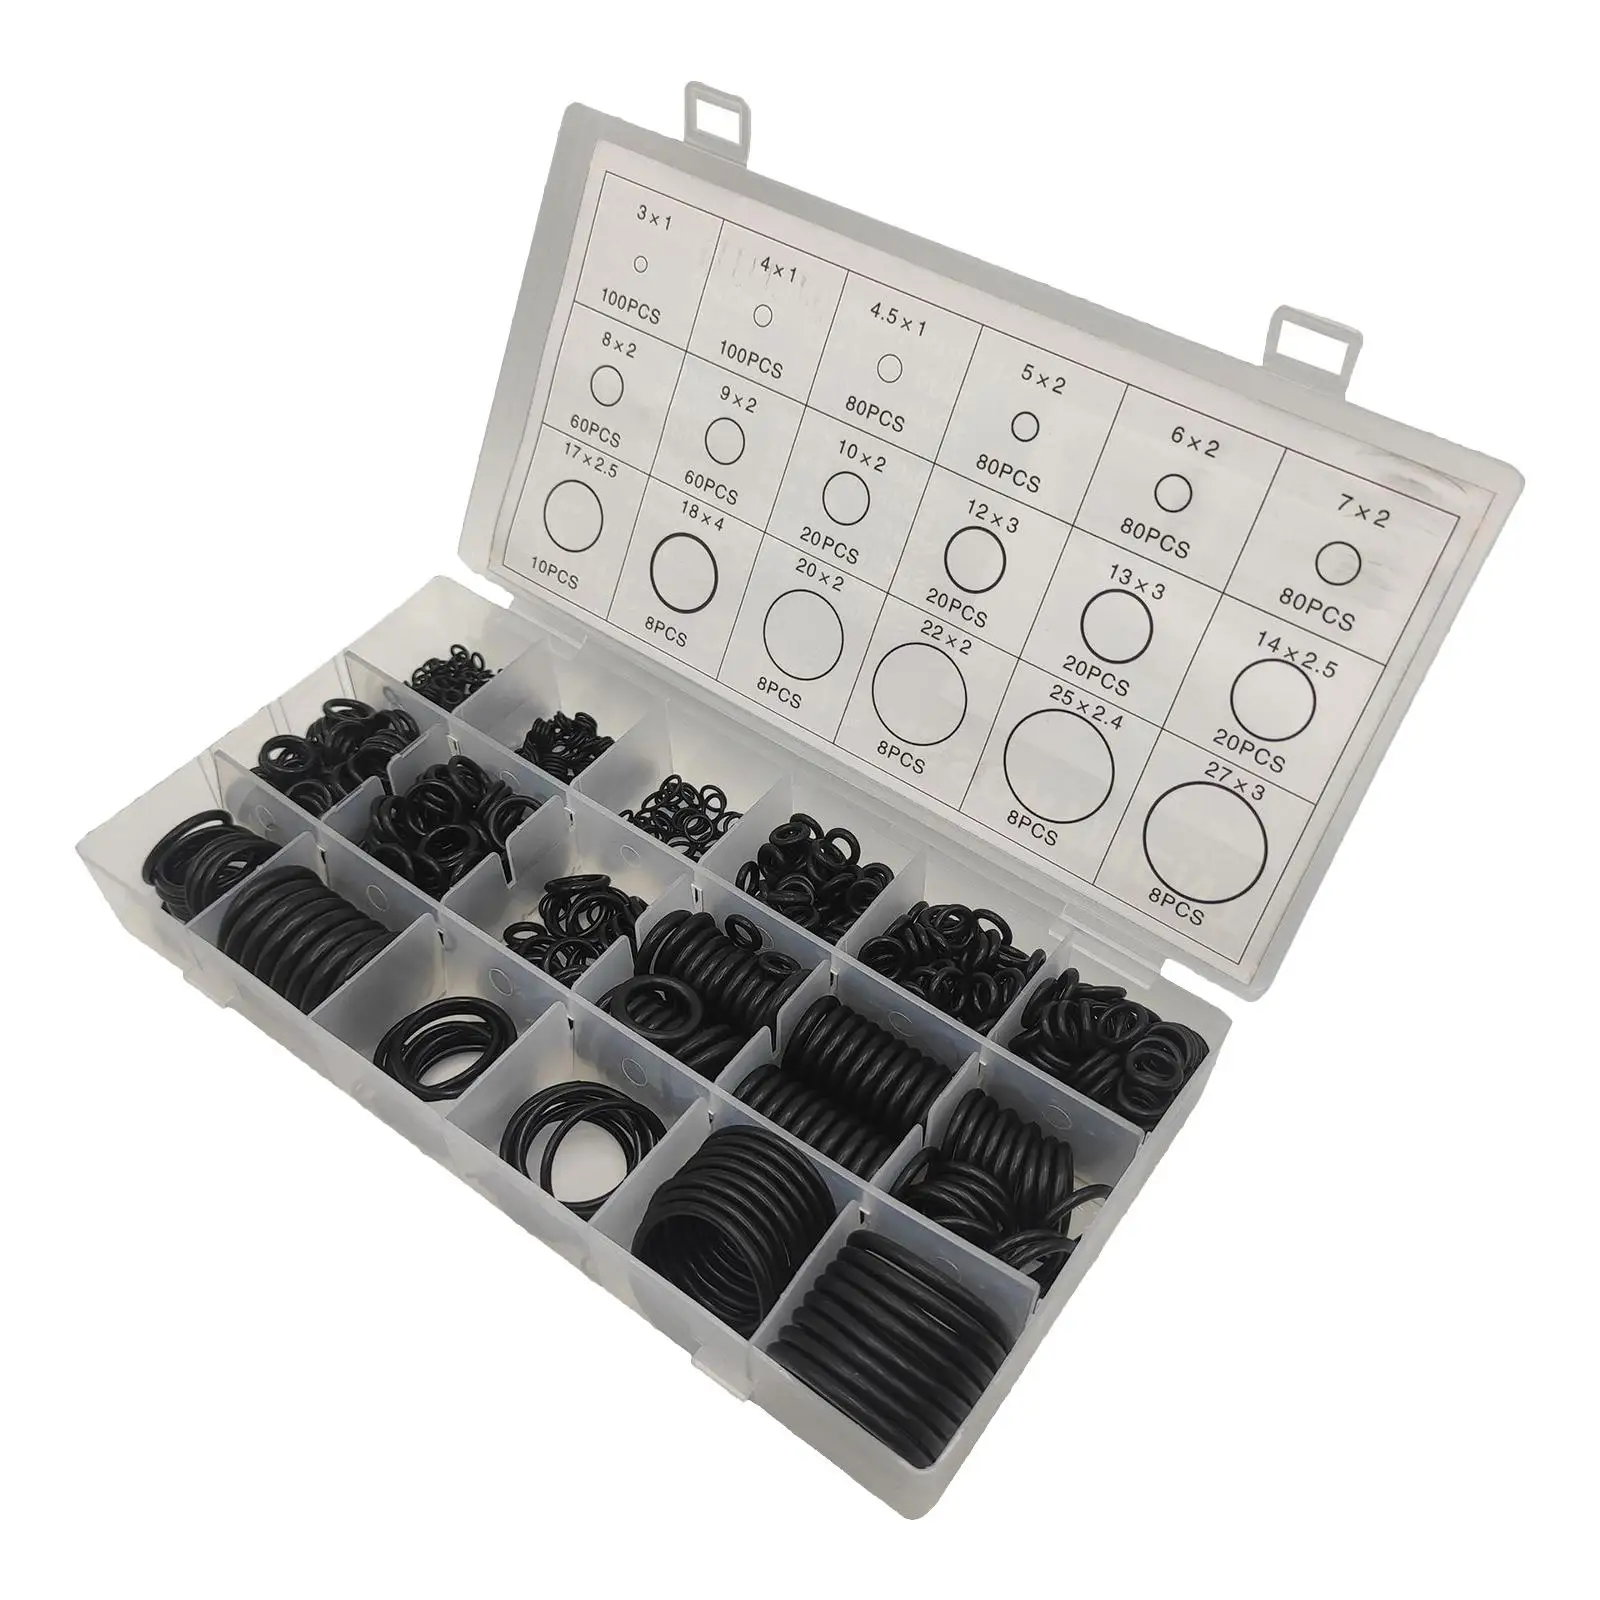 O Rings Assortment kit with Storage Box Black for Auto Quick Repair